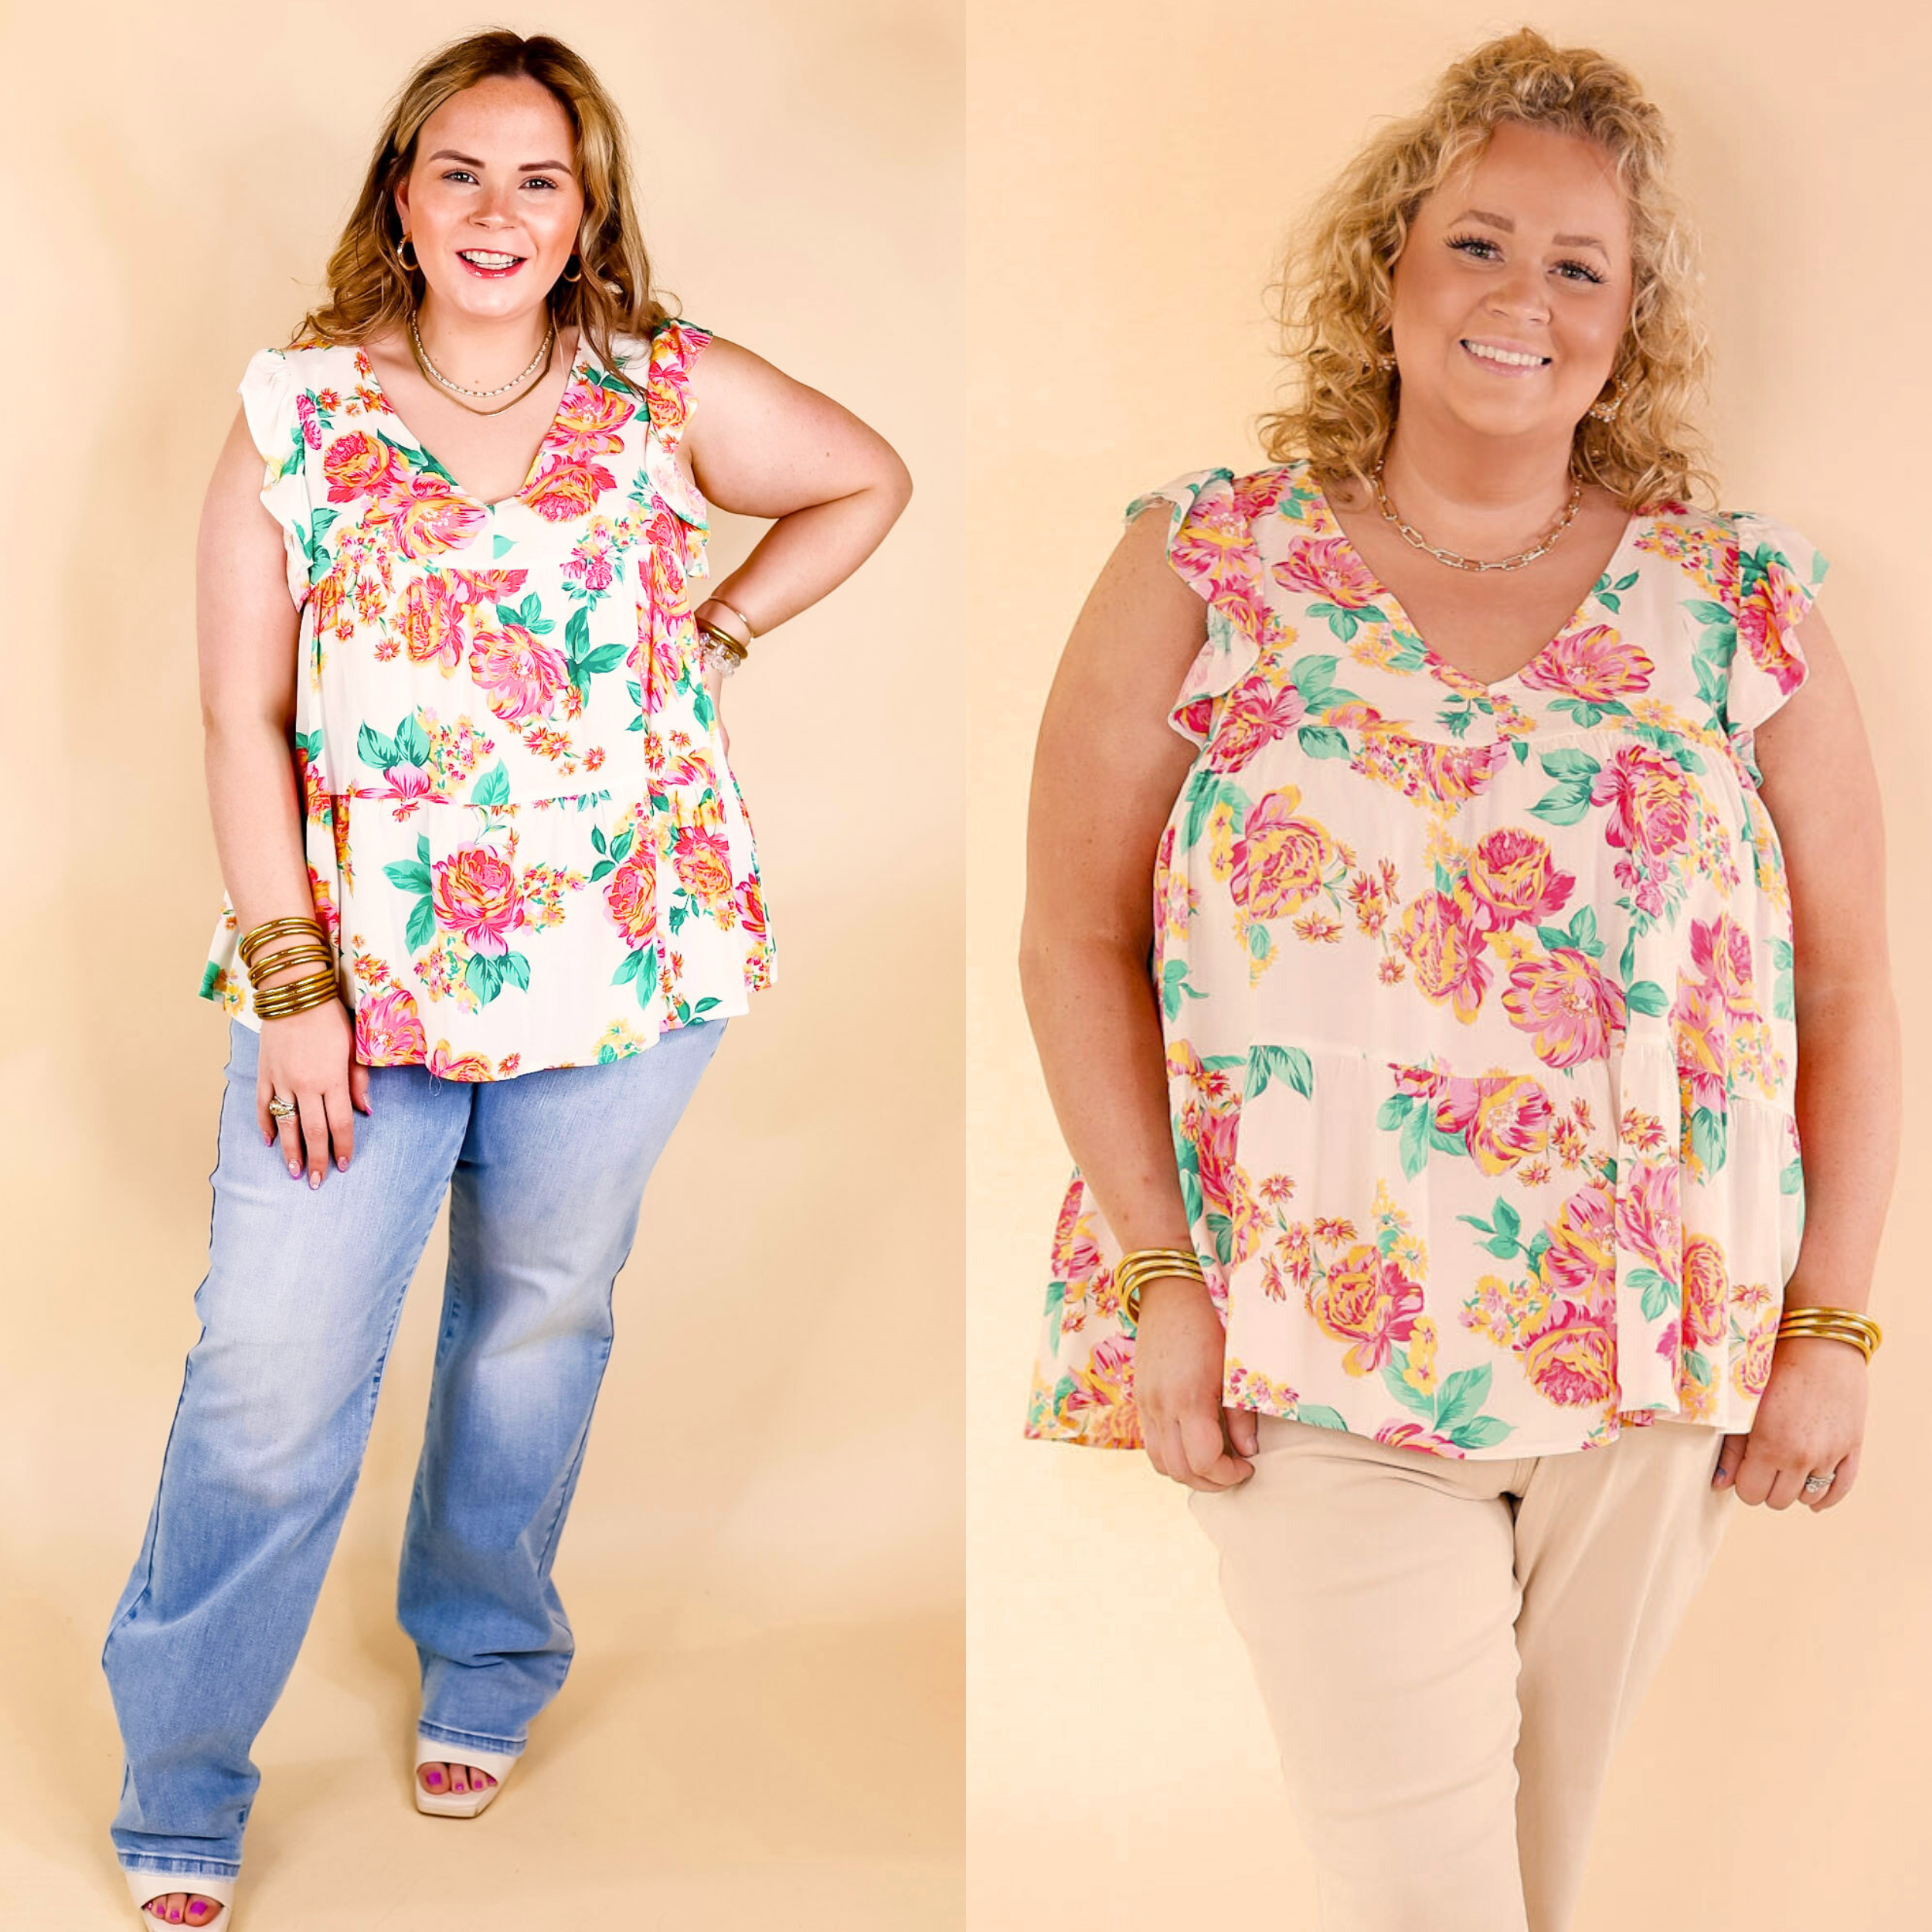 Inspiring Sights Floral V Neck Top with Ruffle Cap Sleeves in White - Giddy Up Glamour Boutique